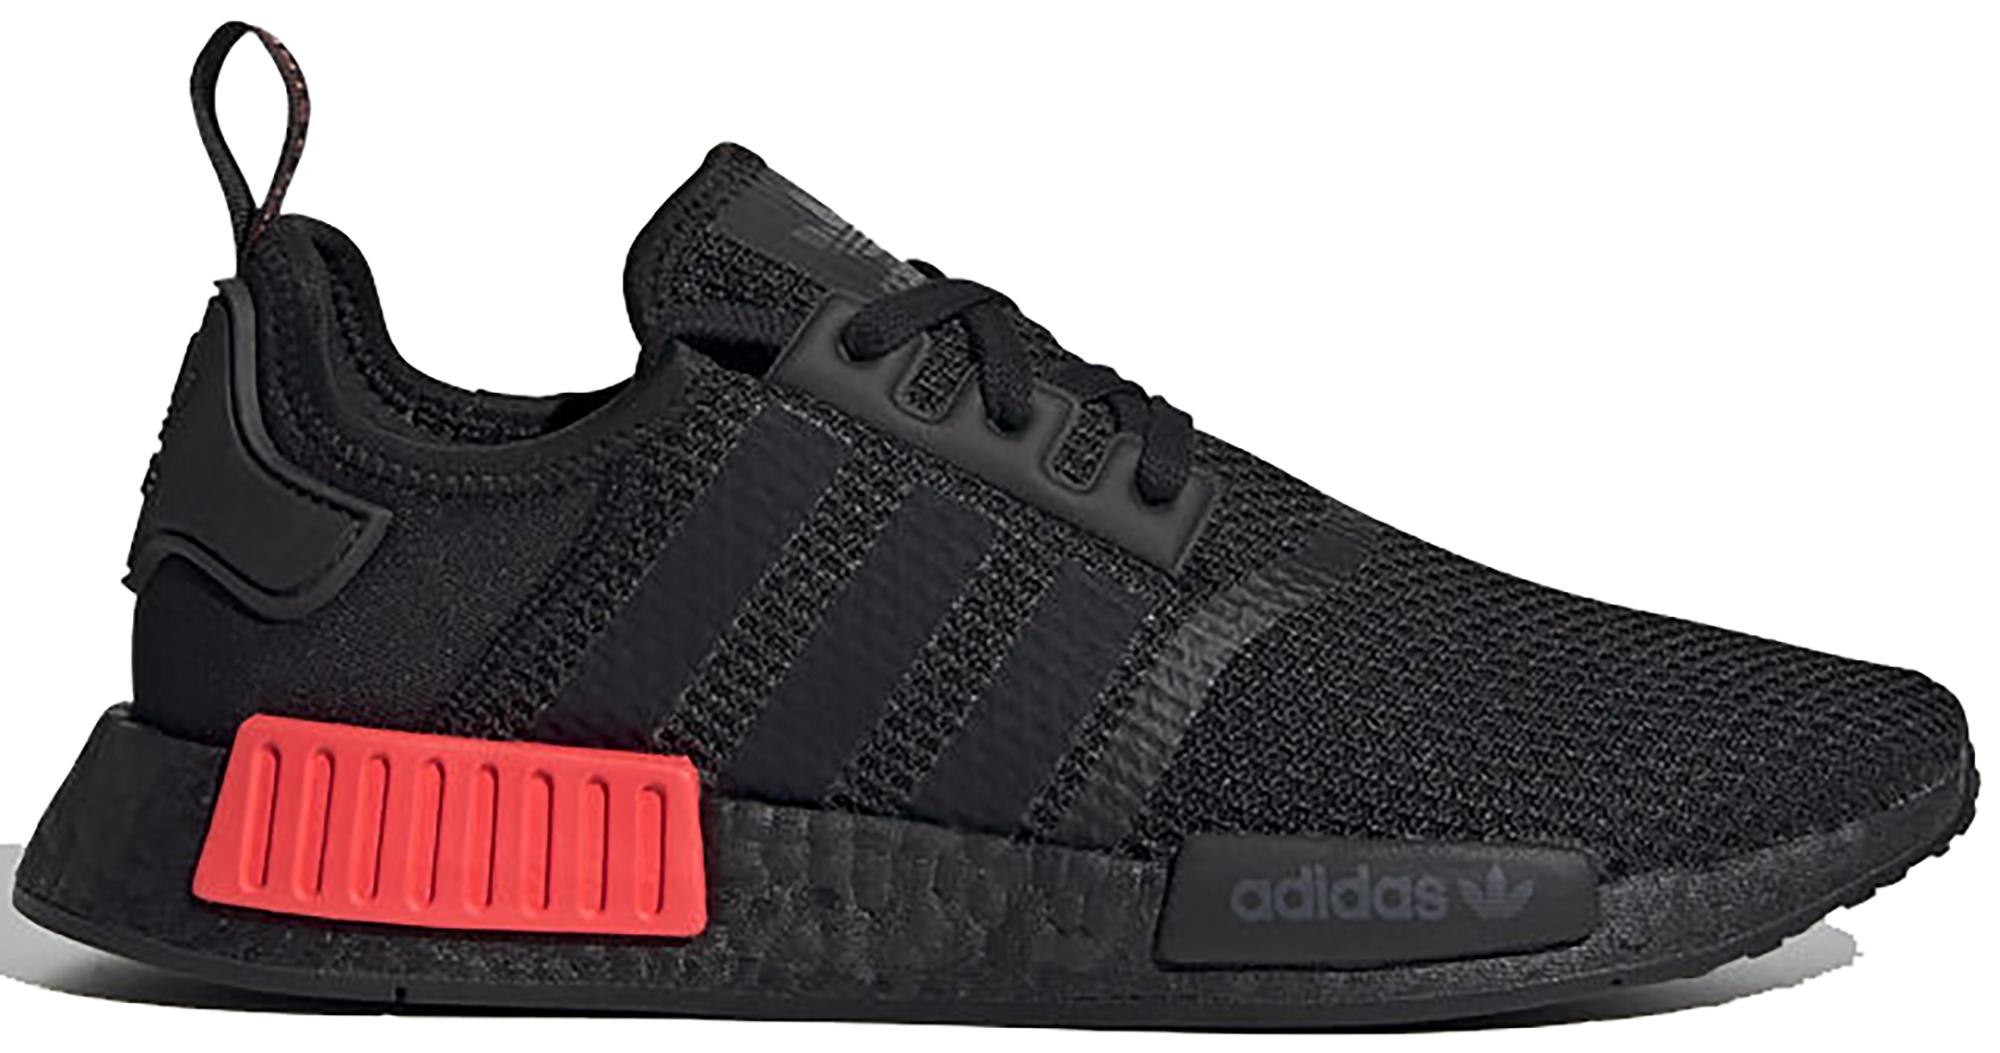 adidas Nmd R1 Core Black Lush Red for 